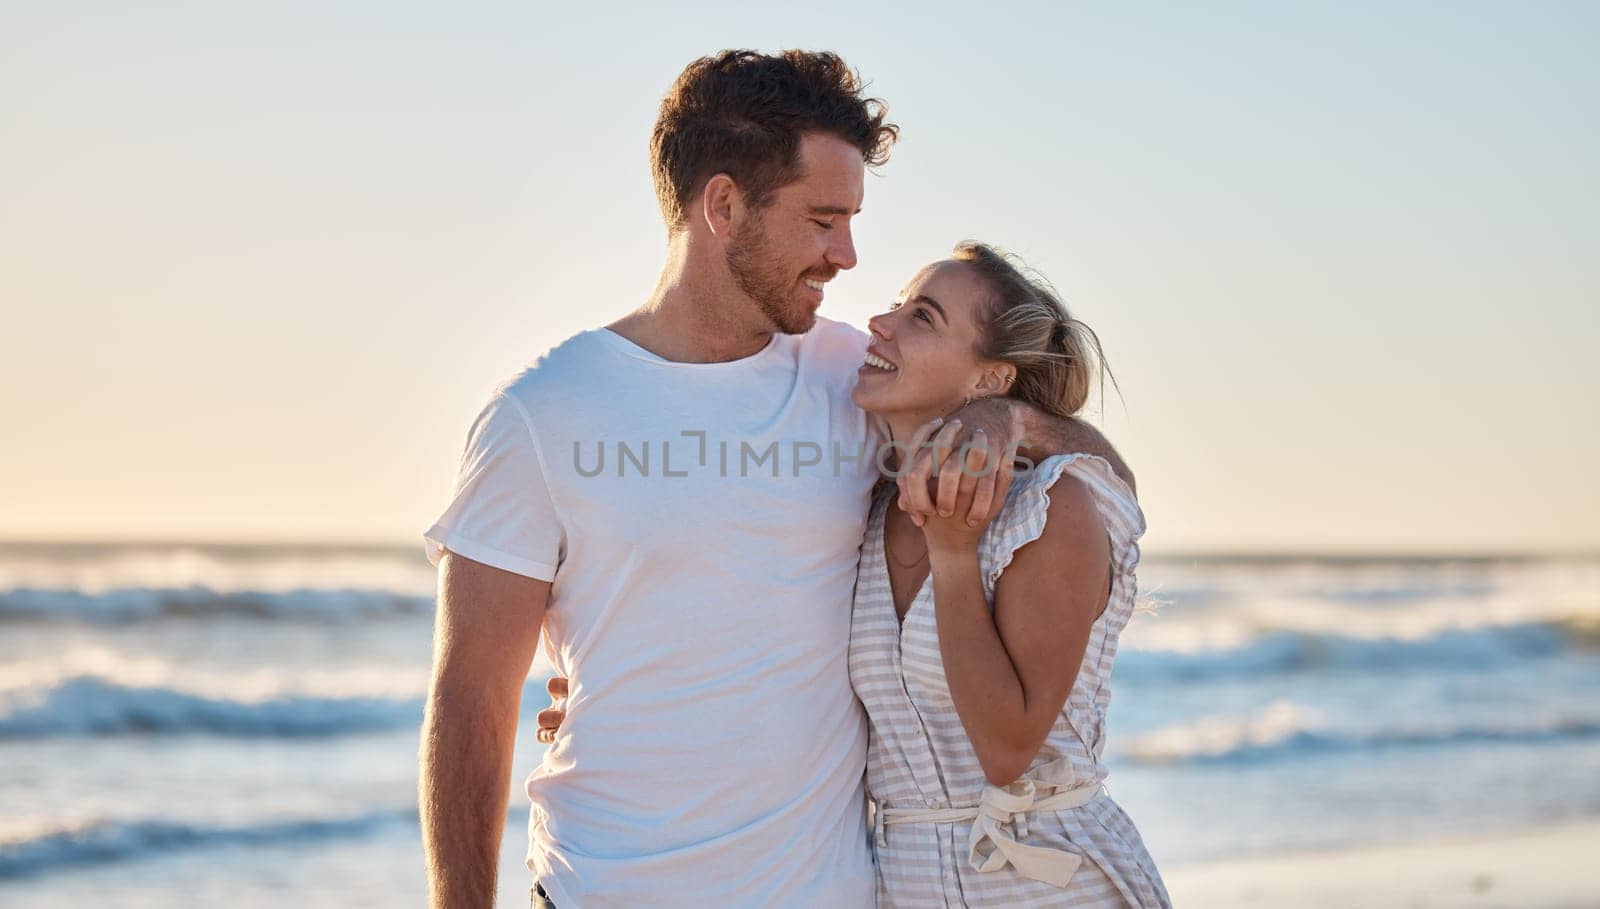 Sunset beach, love and summer with a couple hug on the sand by the sea or ocean while on holiday together. Happy, smile and romance with man and woman bonding while on travel vacation or break at sea by YuriArcurs